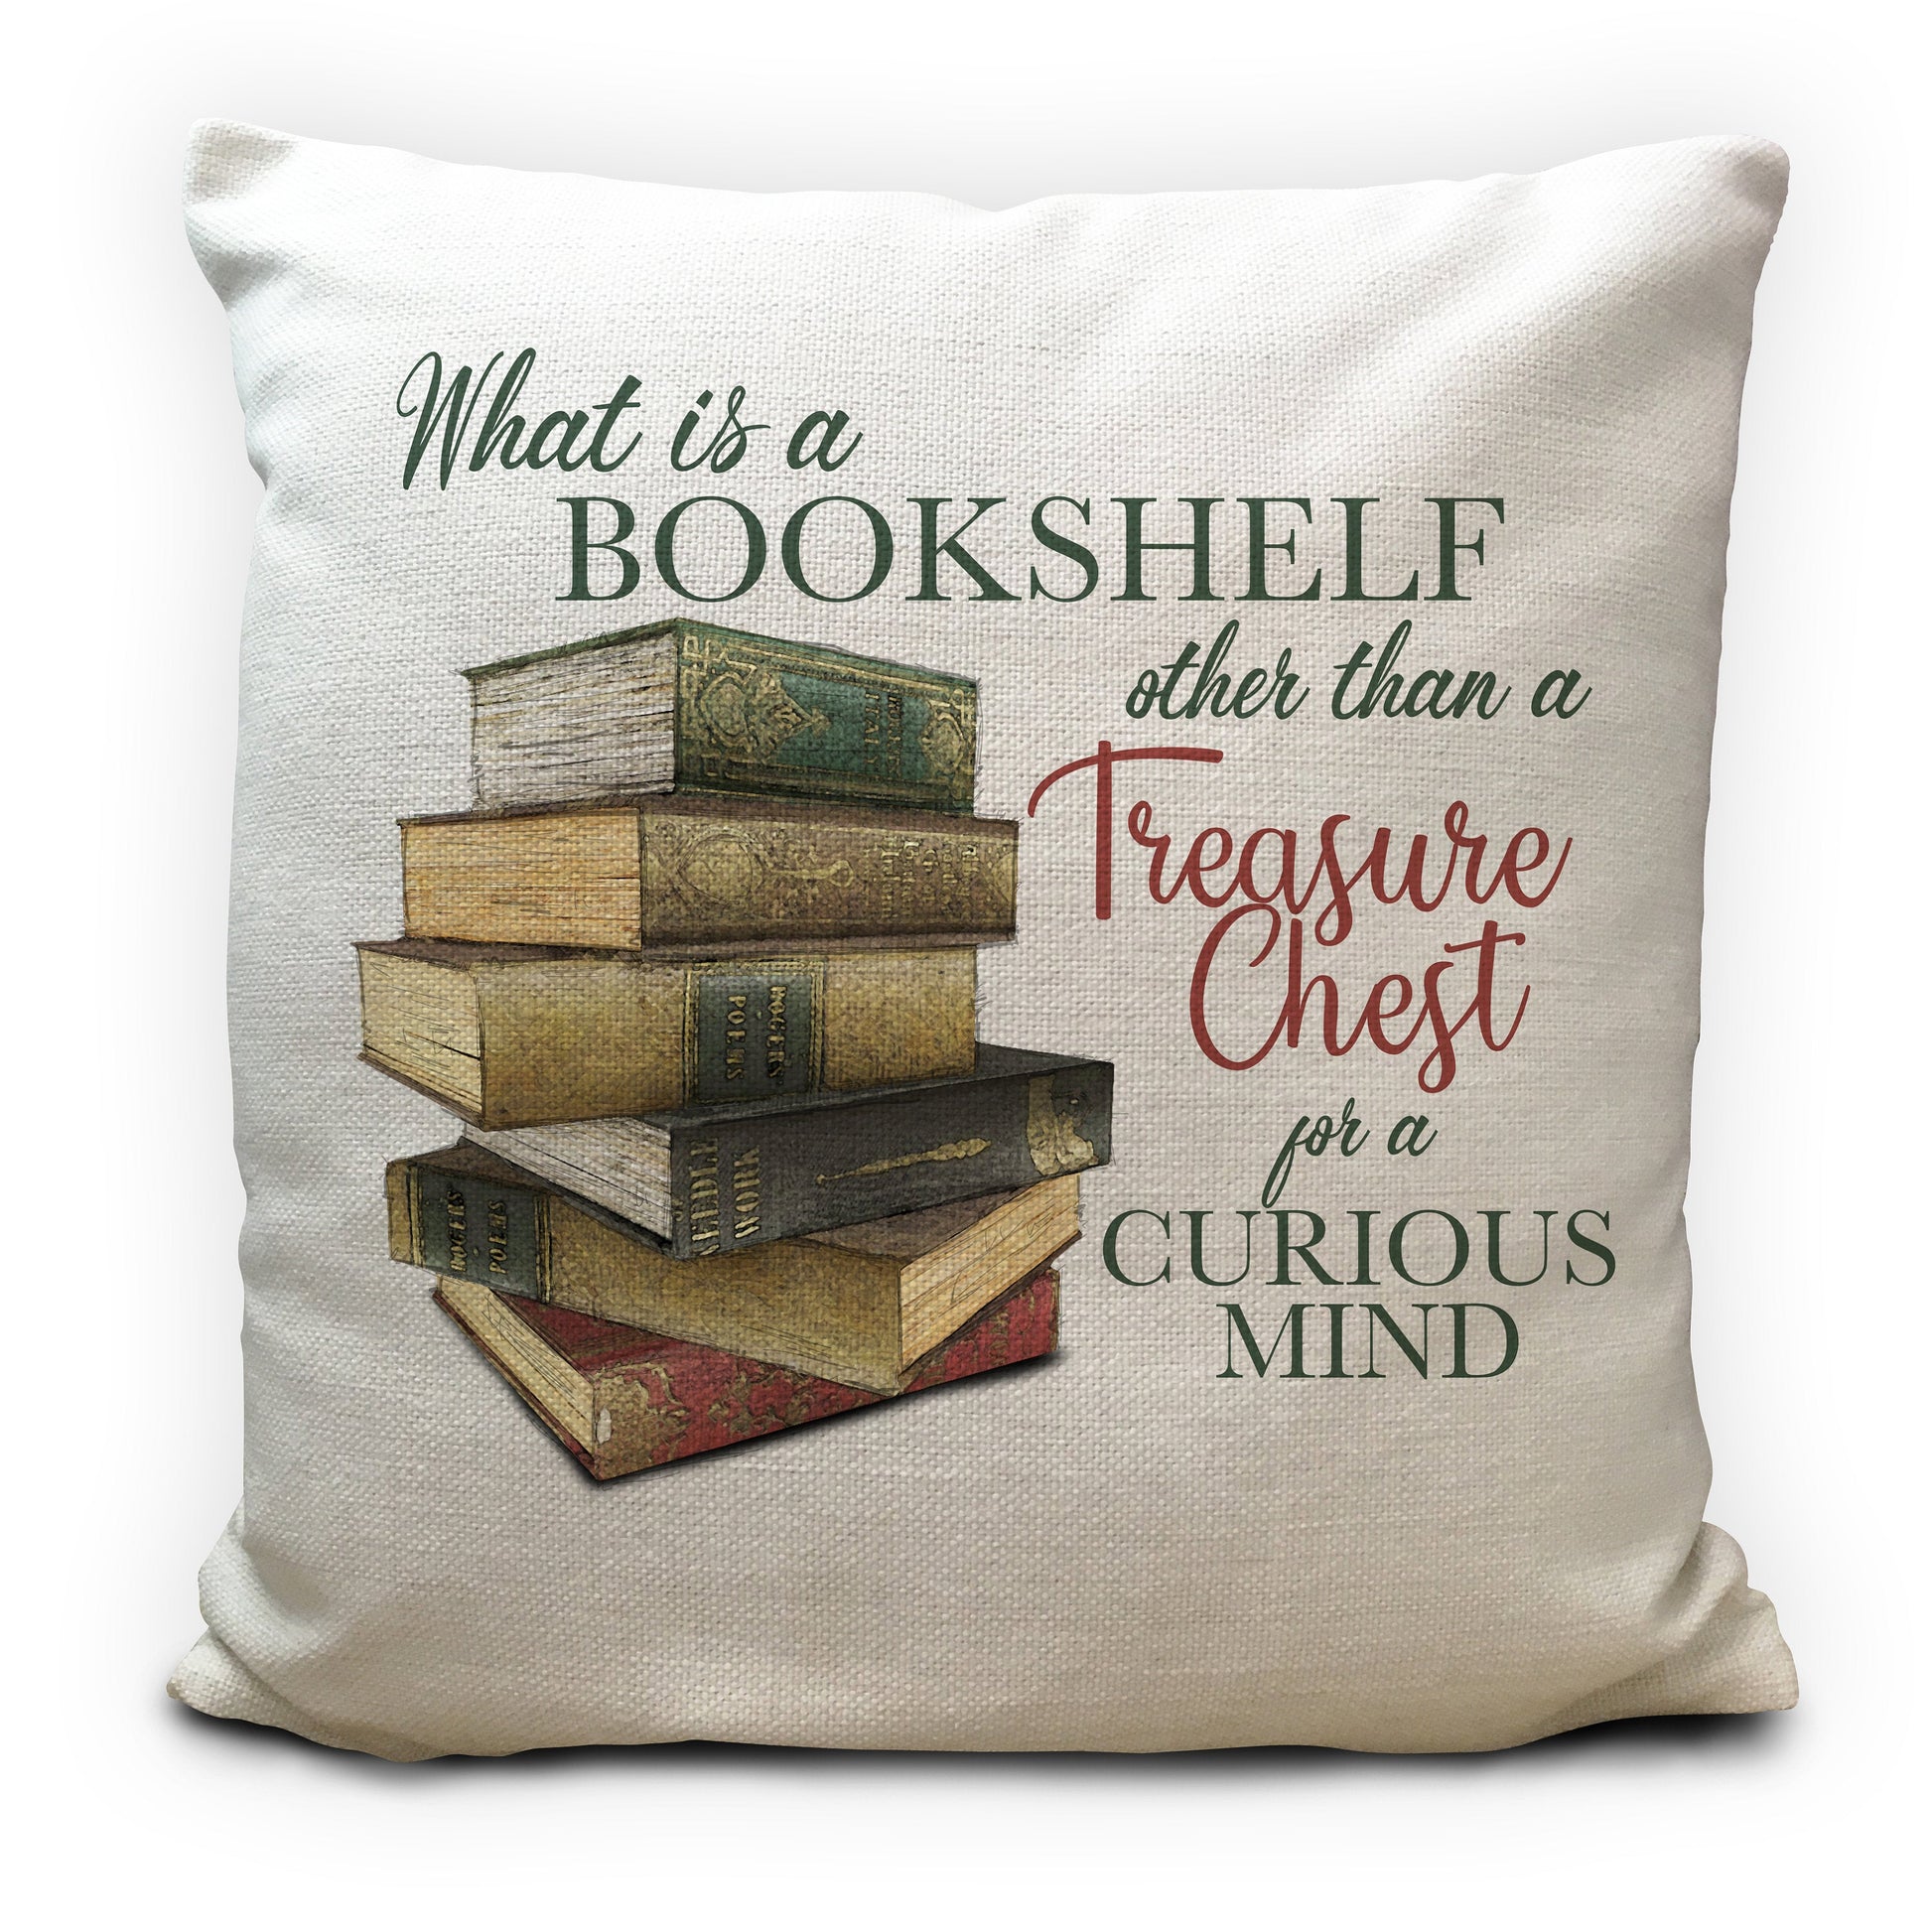 book worm cushion cover with books illustration